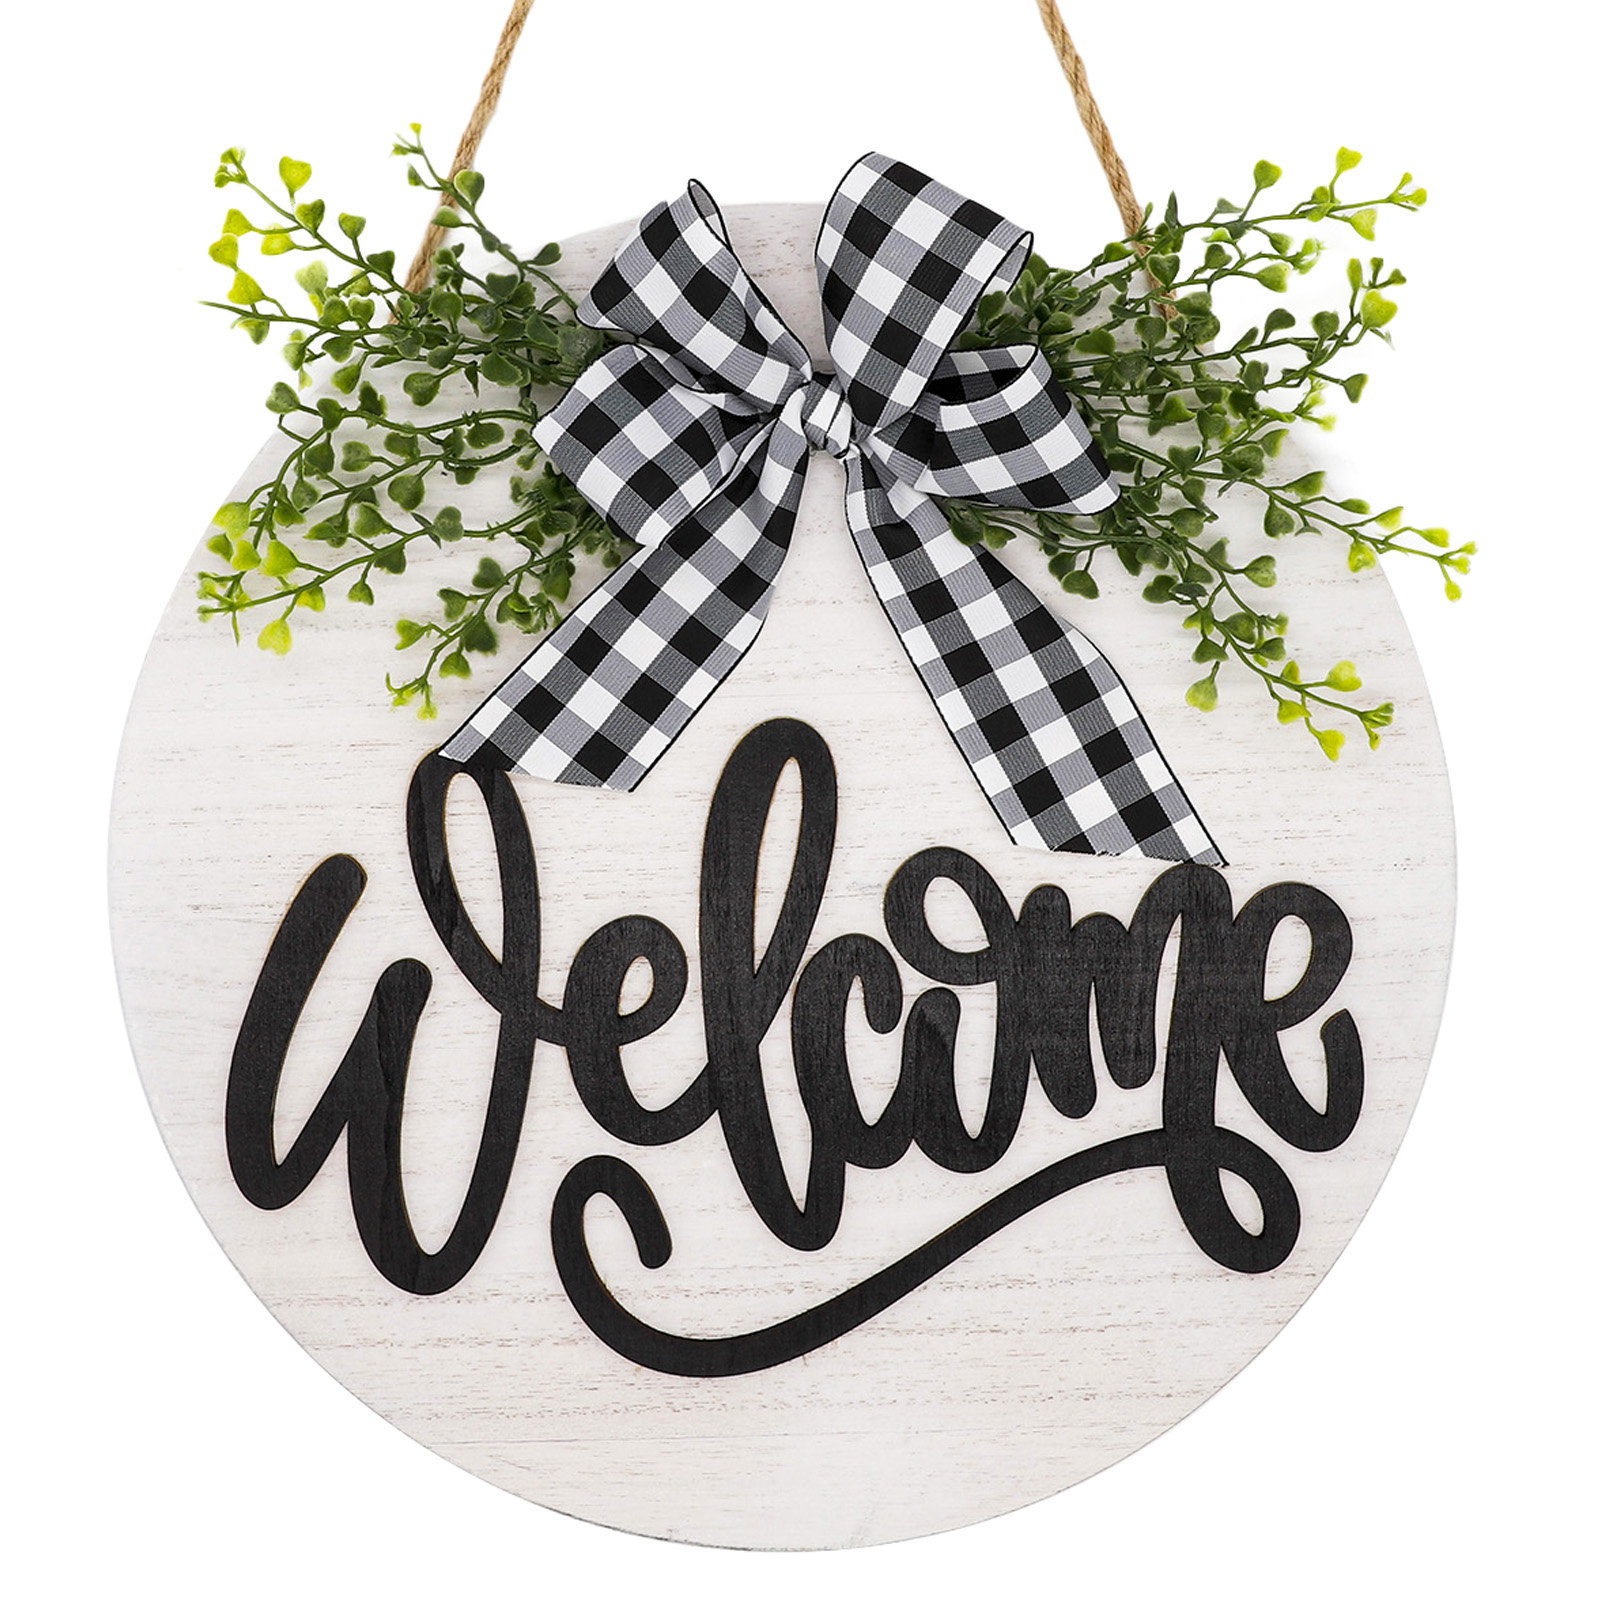 Welcome Wreath Sign for Farmhouse Front Porch Decor Rustic Door Hangers 